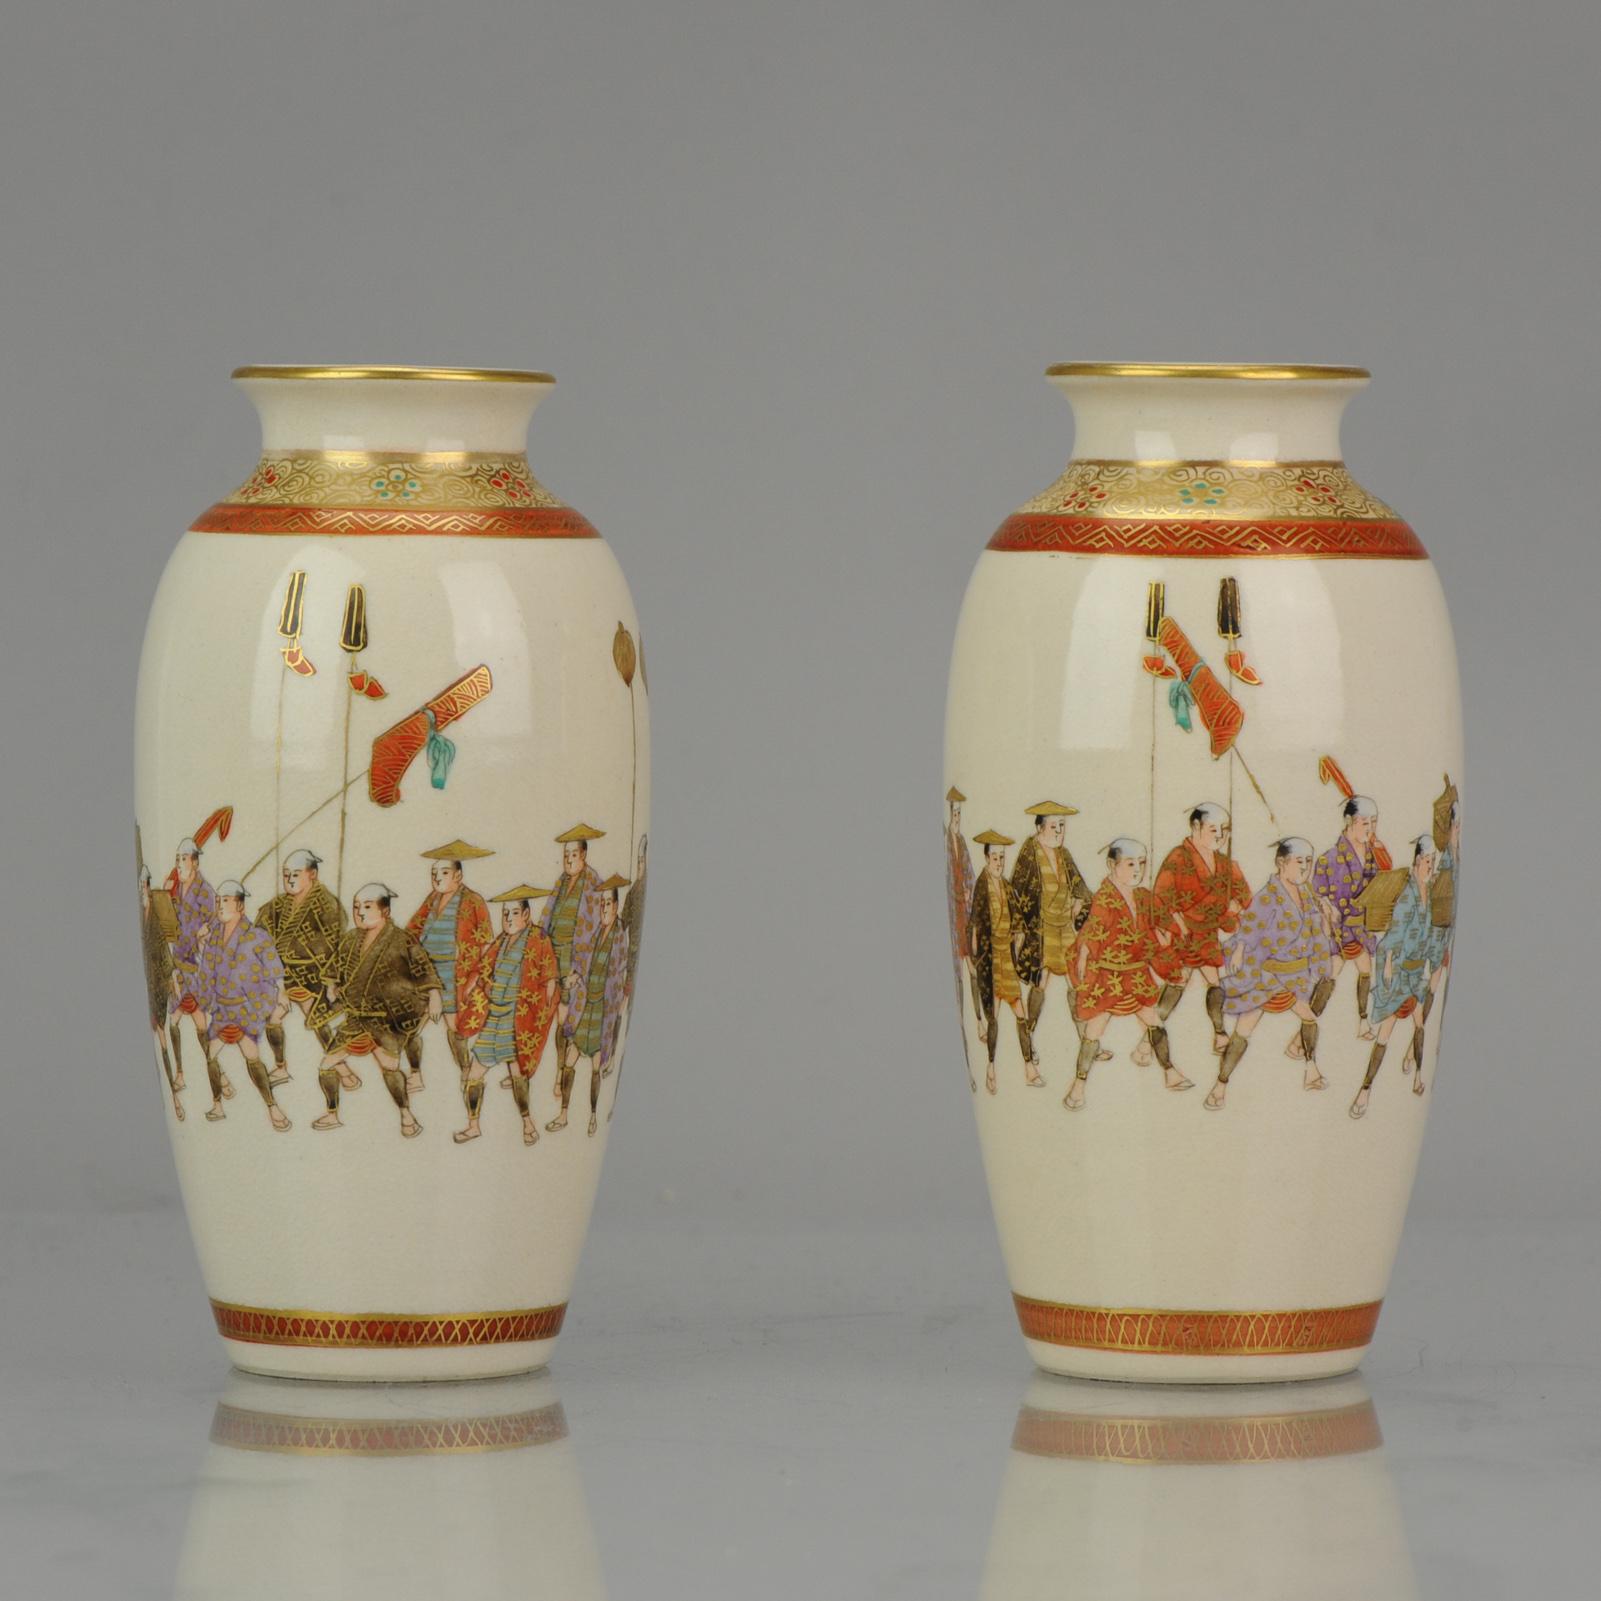 Description

A pair of Japanese Satsuma 'processional' vases, Meiji period
Of ovoid form with everted rims, each painted with a procession of figures in traditional robes, some carrying banners and other objects.

Marked at base: Seizan

15cm